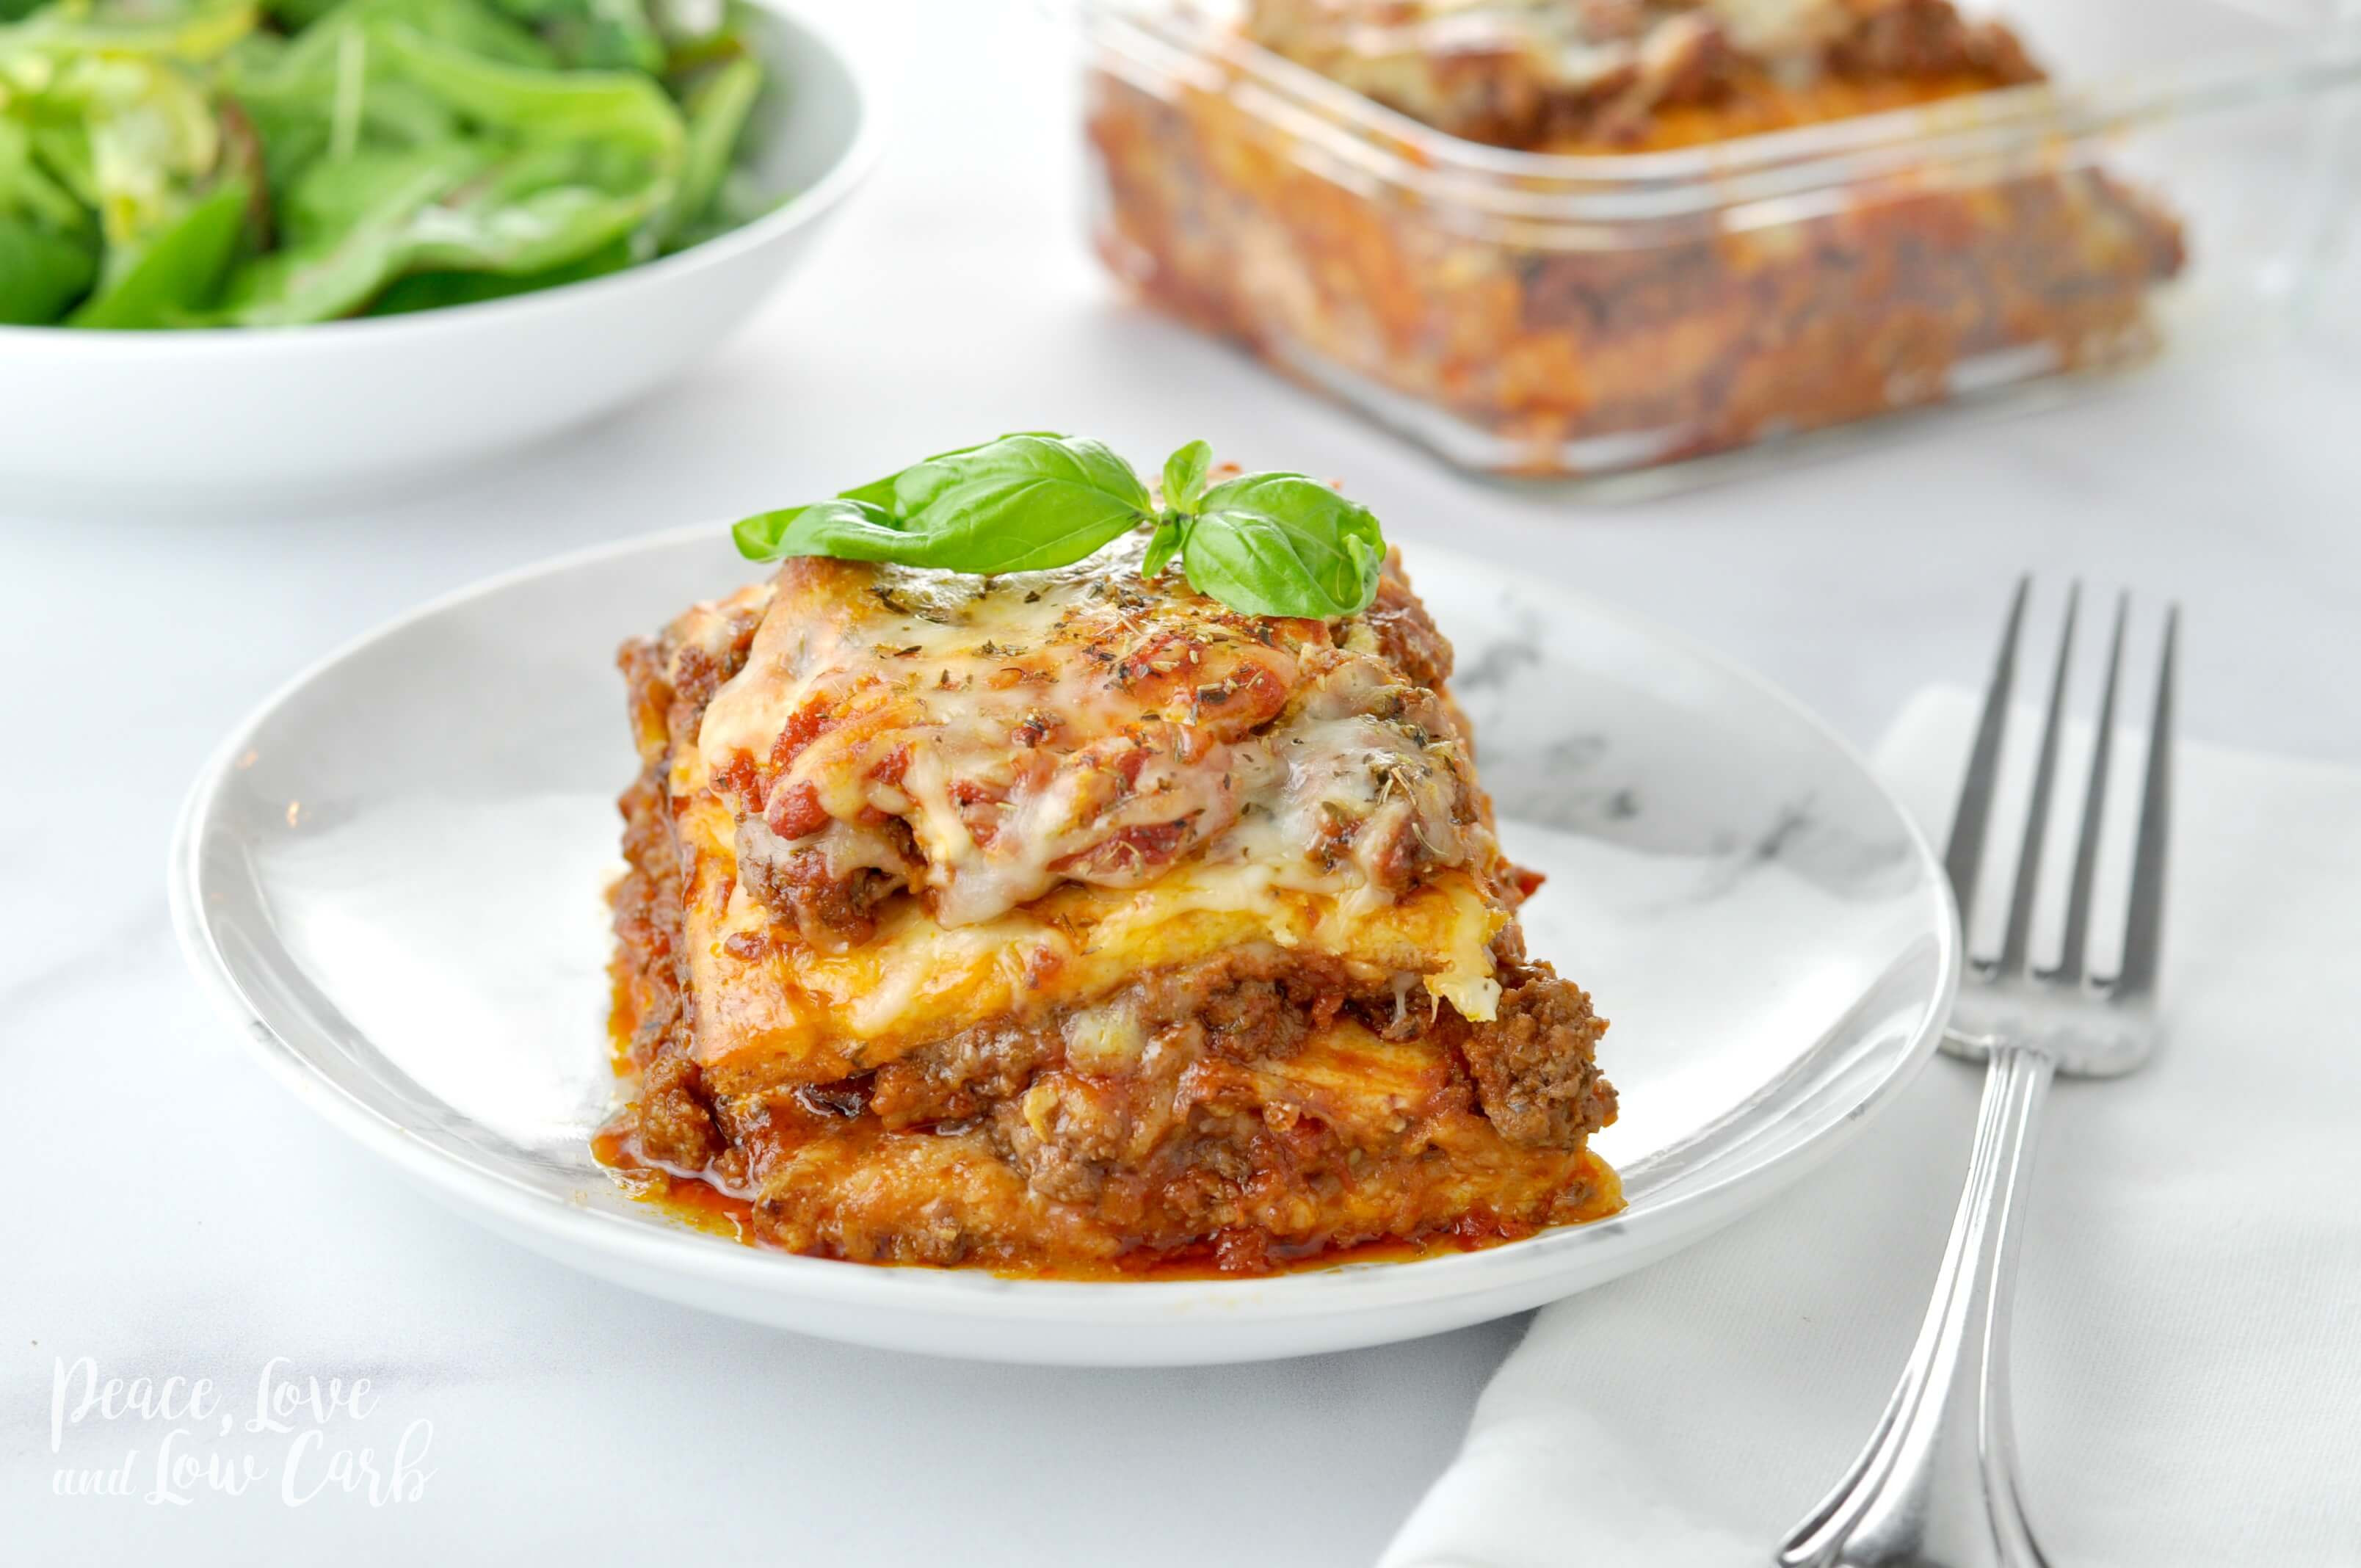 Peace Love And Low Carb Lasagna
 "Just Like the Real Thing" Low Carb Keto Lasagna